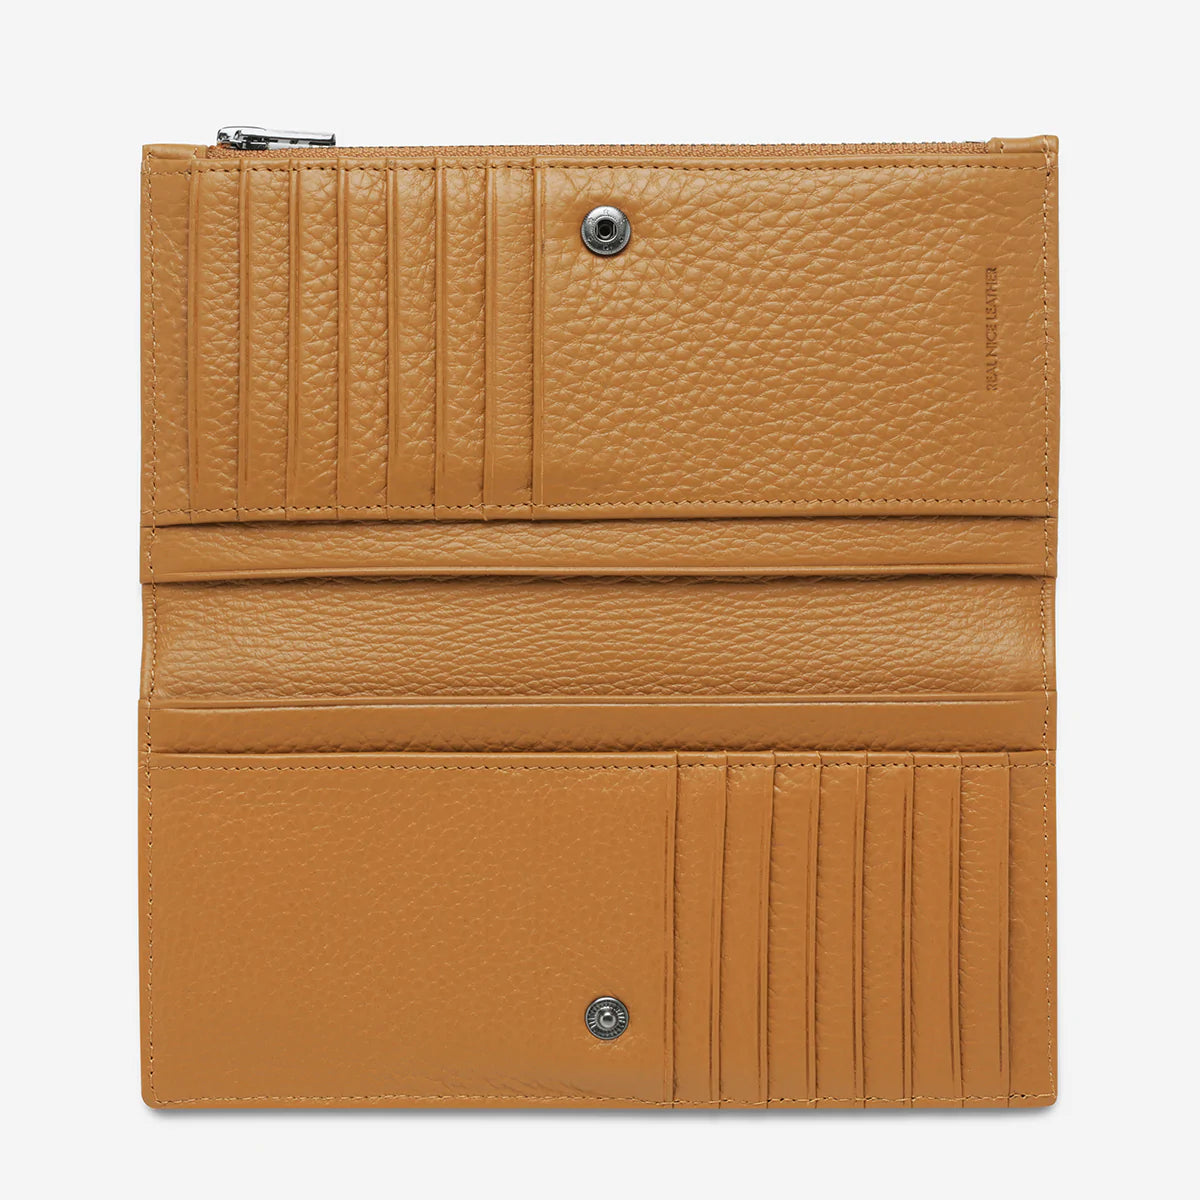 STATUS ANXIETY OLD FLAME WALLET TAN